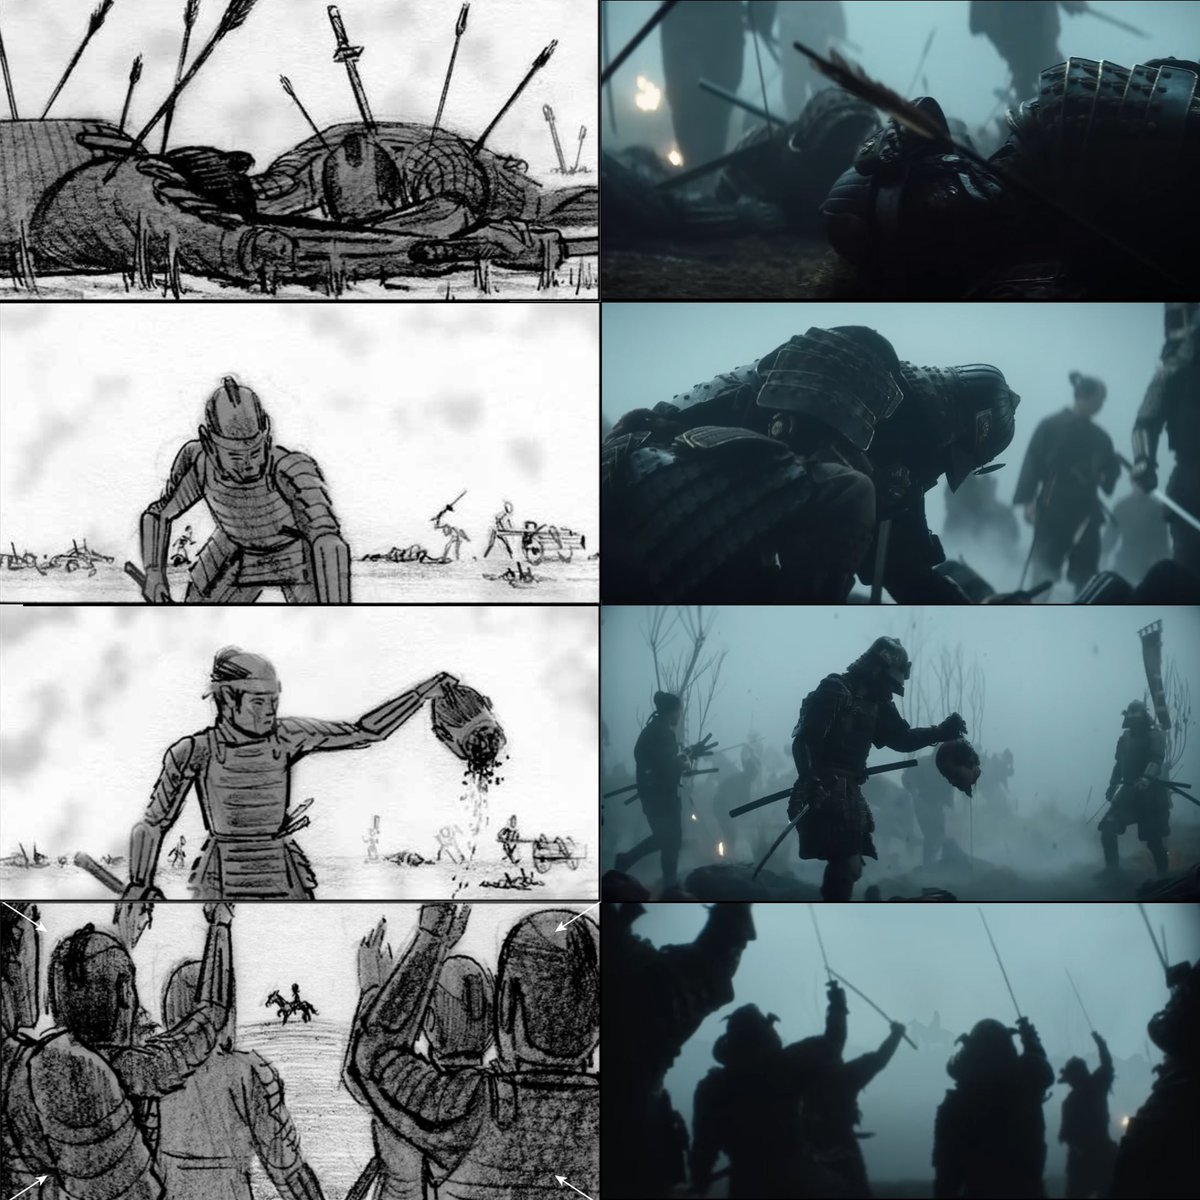 Just a few storyboards I did for the new Shogun limited series matched with shots from the trailer. Can’t wait to watch the story unfold. #Shogun #storyboards #previz